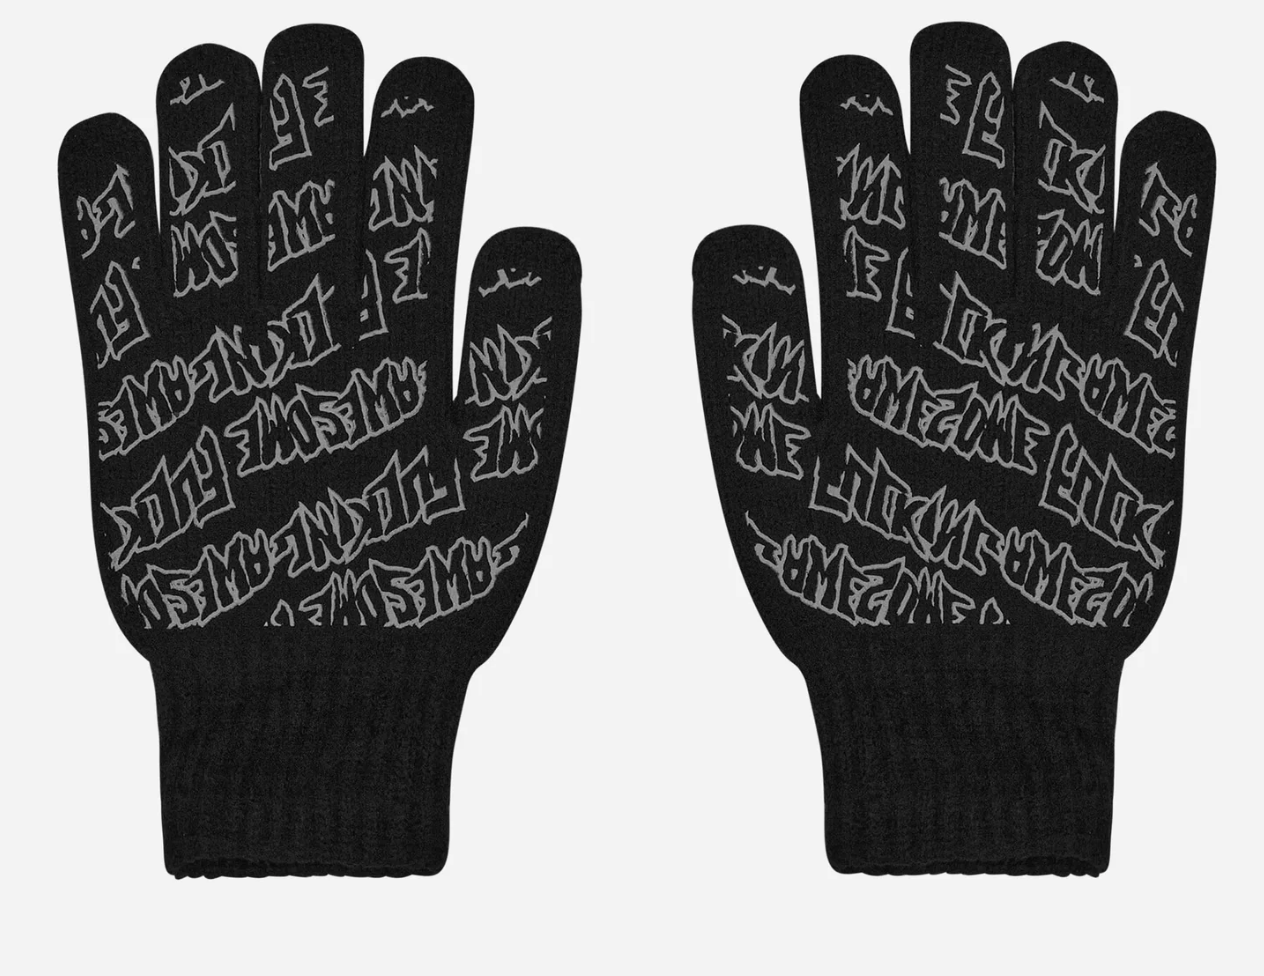 Fucking Awesome – Reflective Stamp Gloves